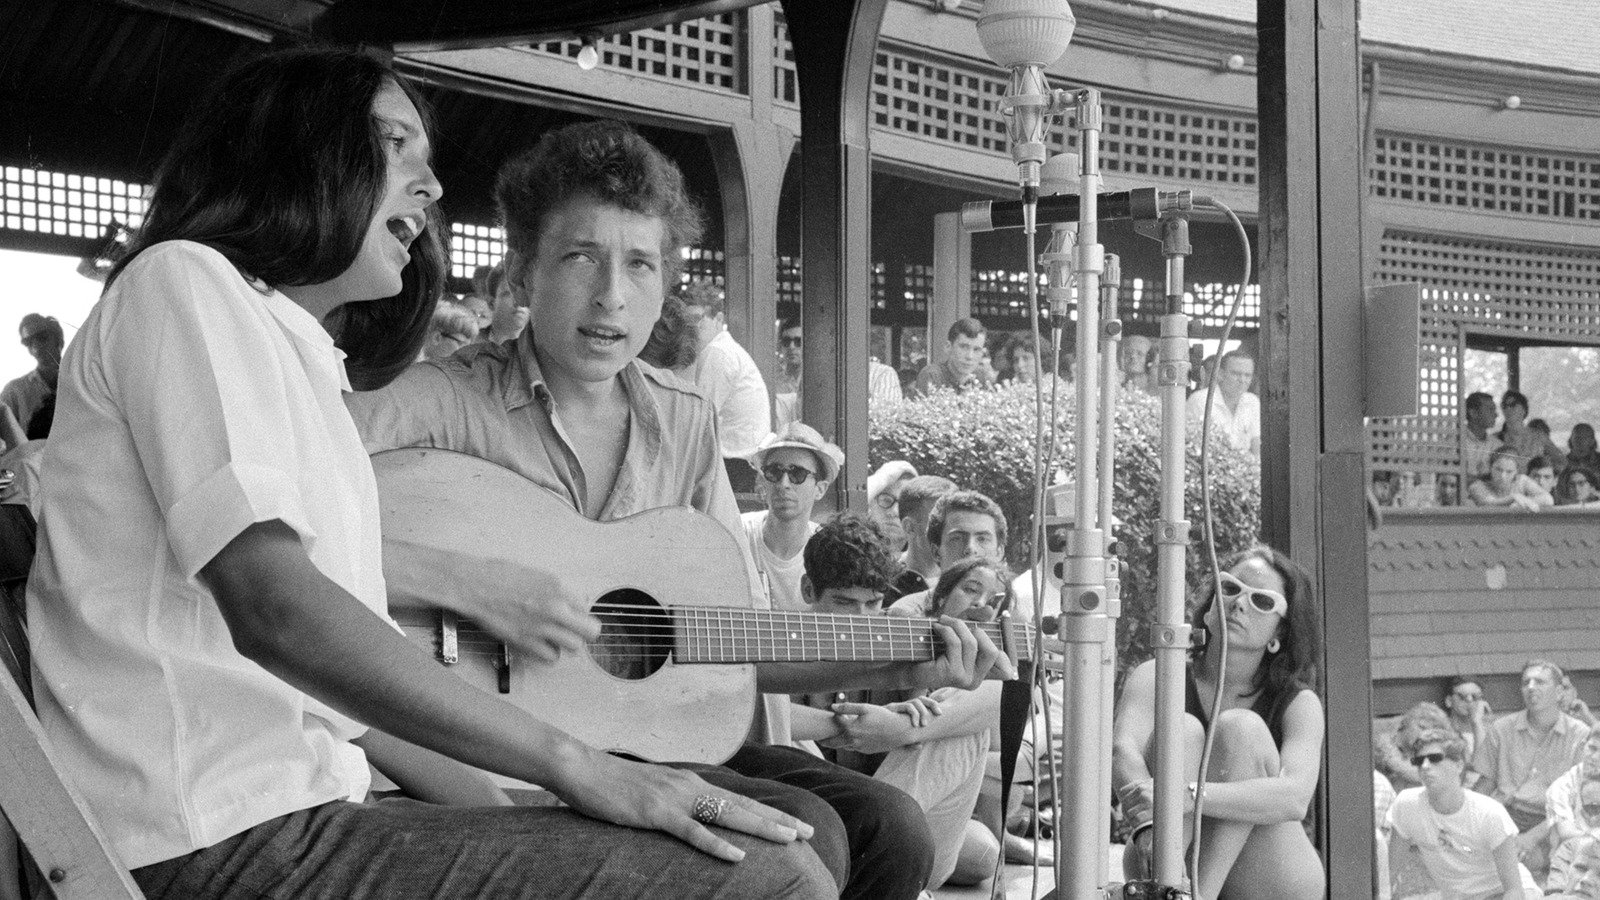 A Look At Bob Dylan's Complicated Love Life